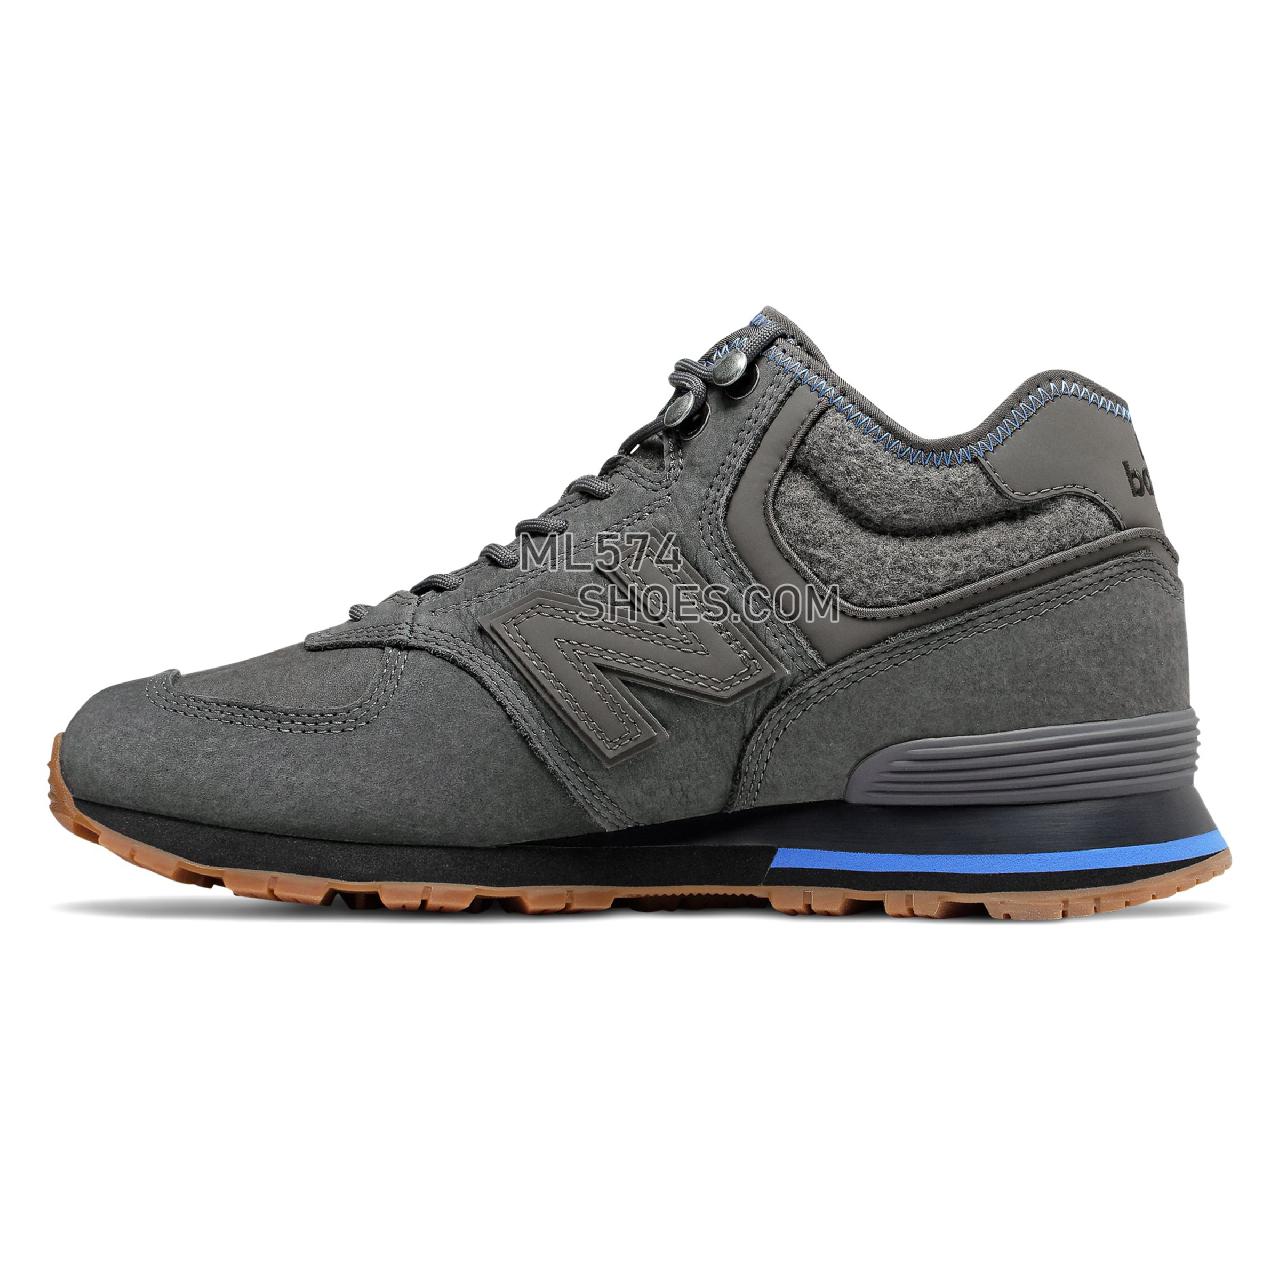 New Balance 574 Mid - Men's 574 Mid Classic MH574V1-27283-M - Magnet with Lapis Blue - MH574REA